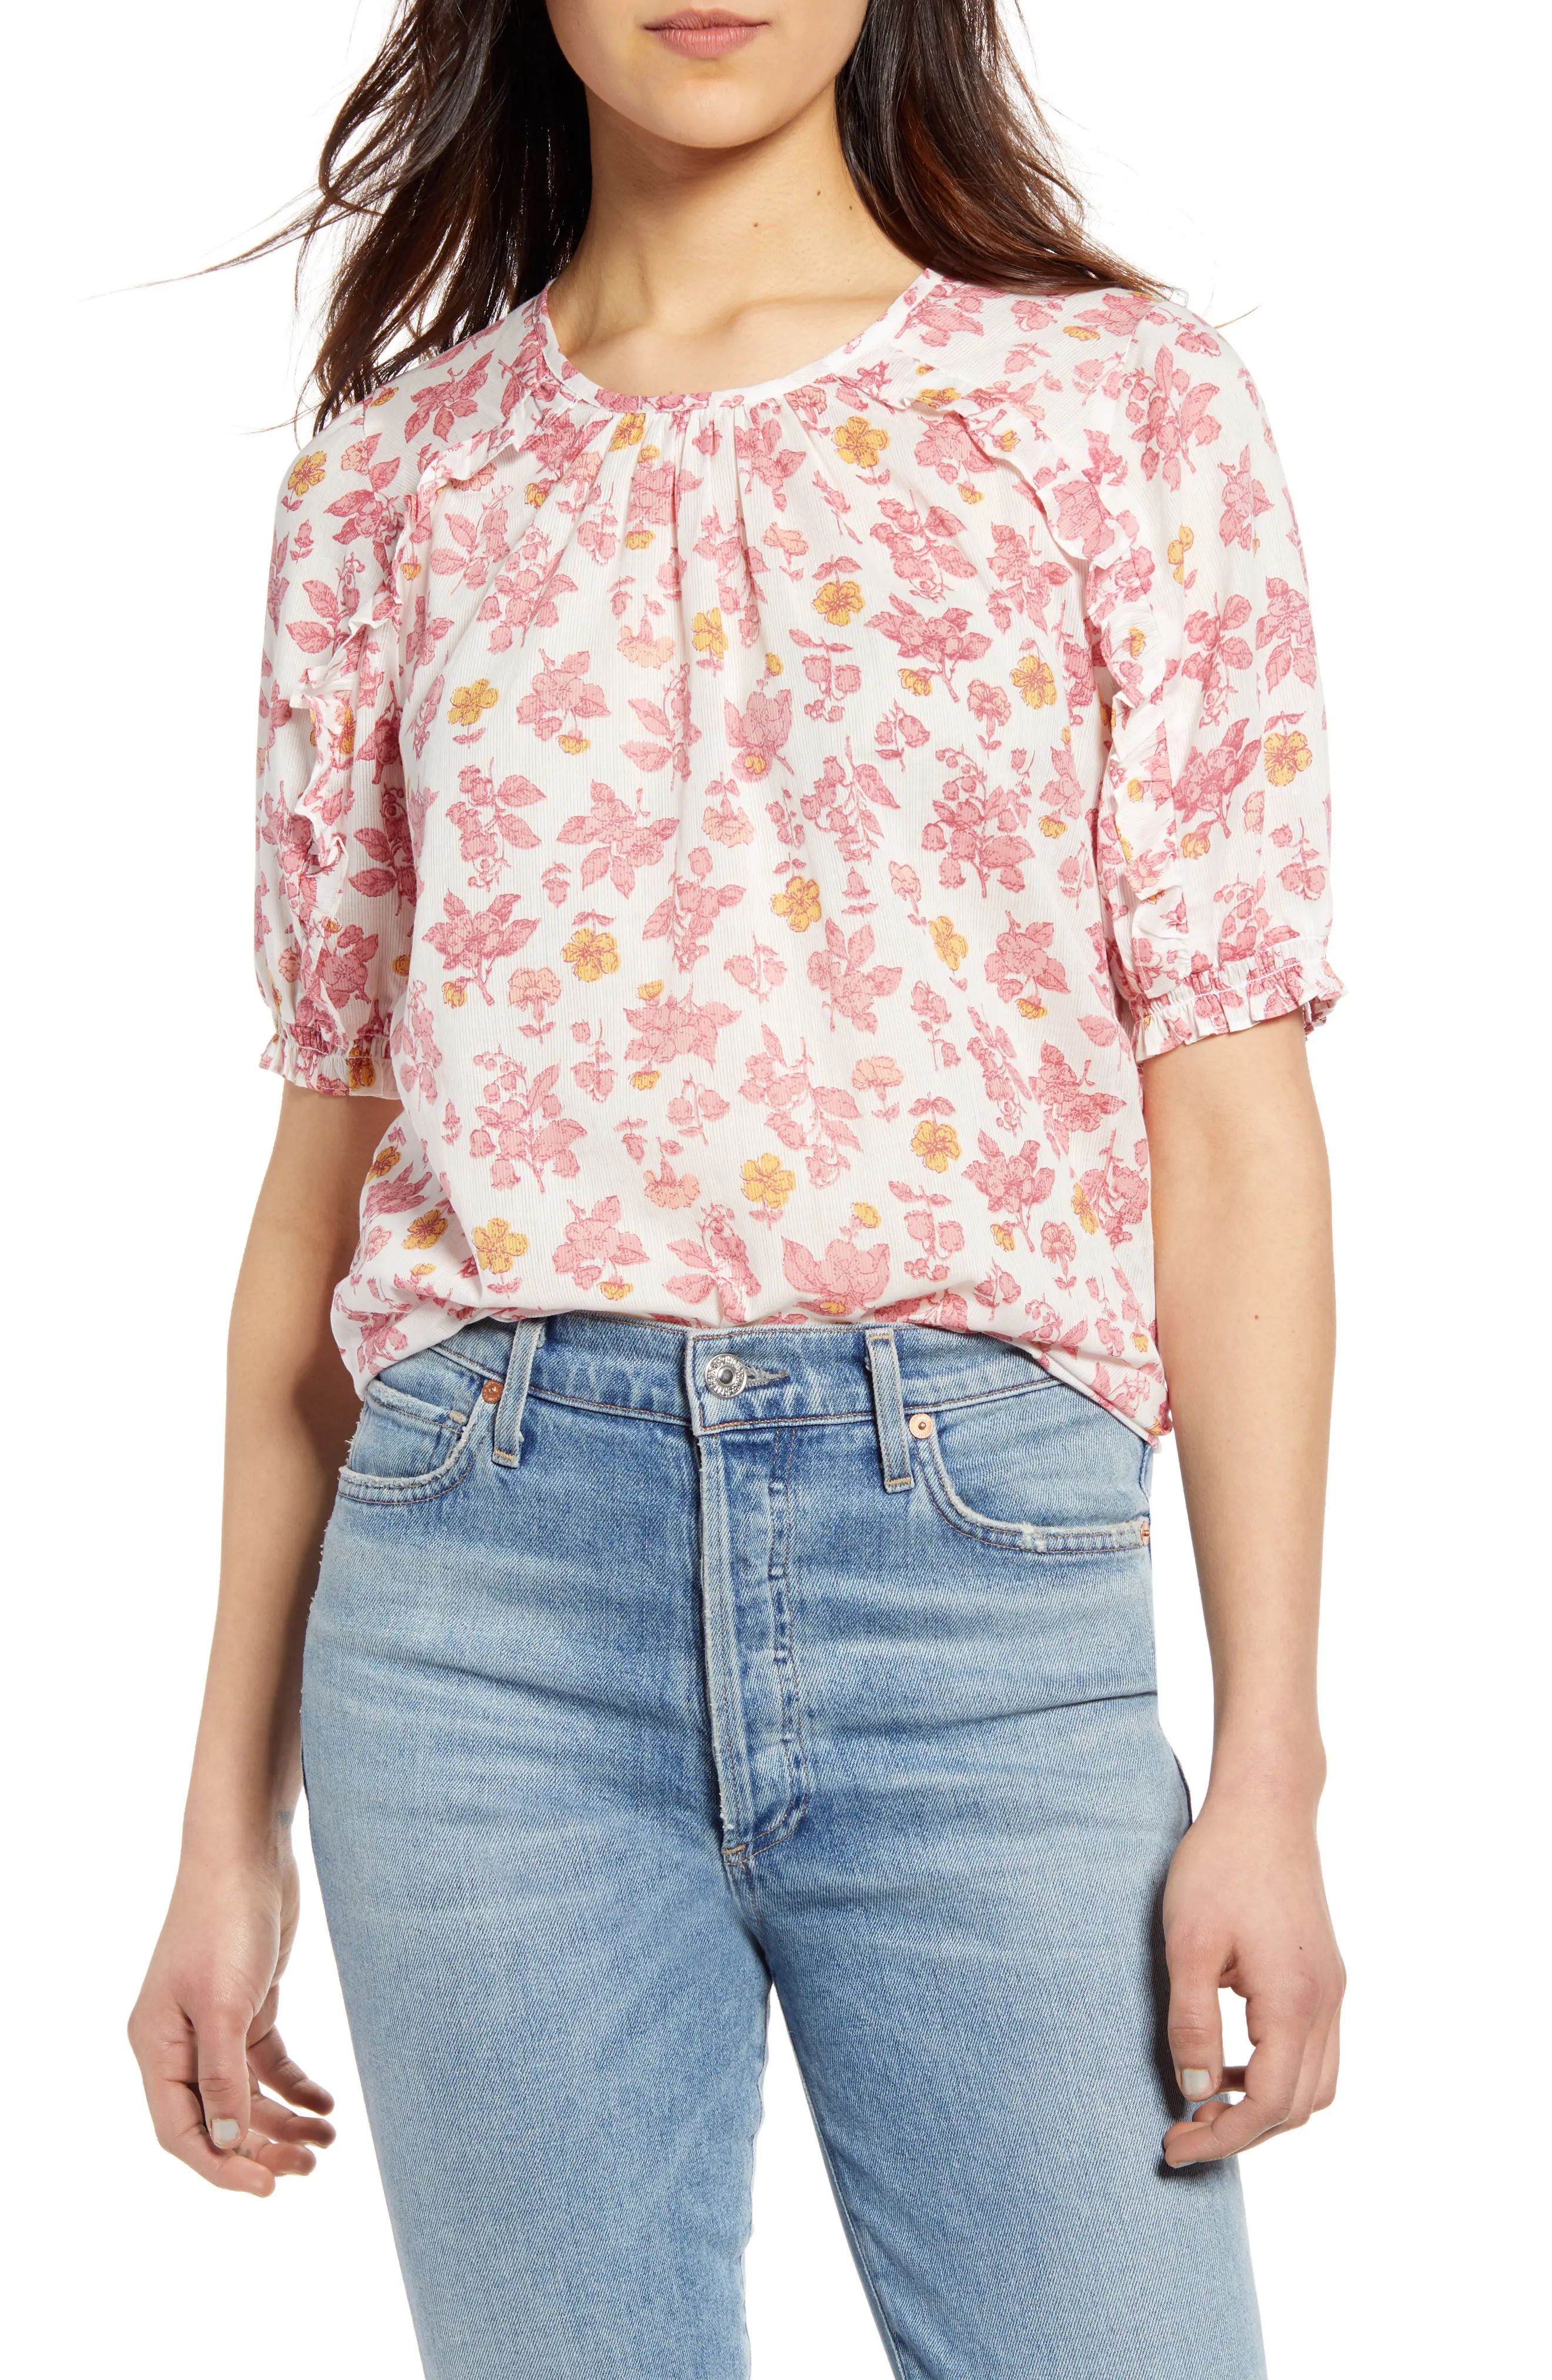 Women's Lucky Brand Lauren Floral Ruffle Cotton Top, Size X-Small - Pink | Nordstrom